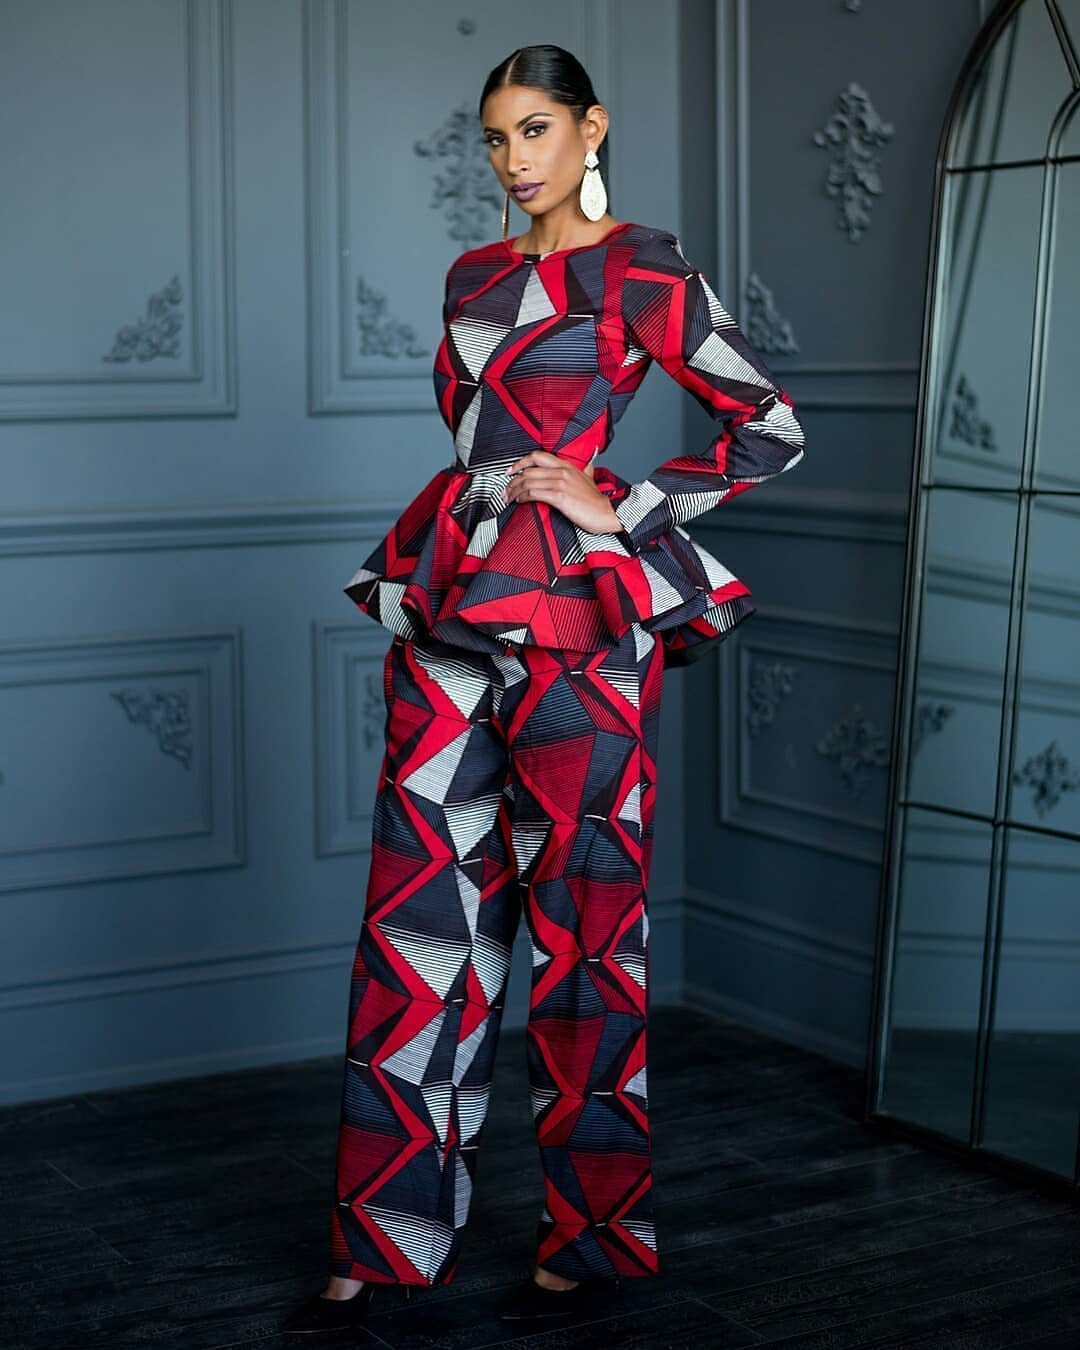 Hot Ankara Dress Inspiration For Female: African fashion,  Ankara Dresses,  Ankara Outfits,  African Attire,  African Outfits,  Asoebi Styles,  Colorful Dresses,  Printed Dress  